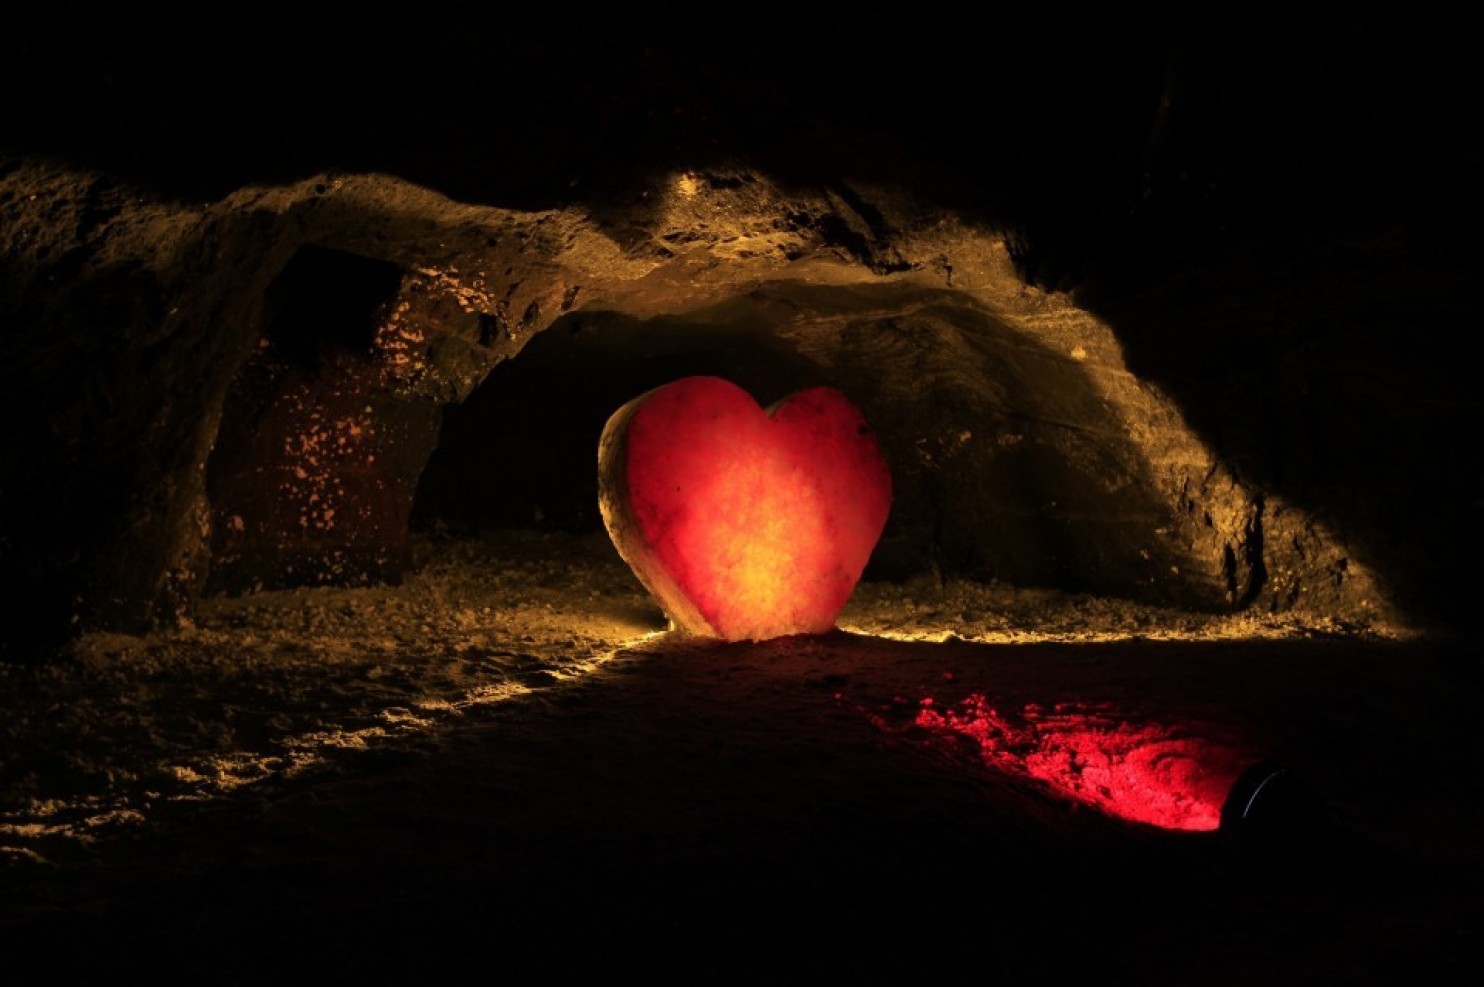 A halite salt crystal in the shape of a heart is seen in the Nemocon salt mine in Colombia on Sept. 26, 2012.